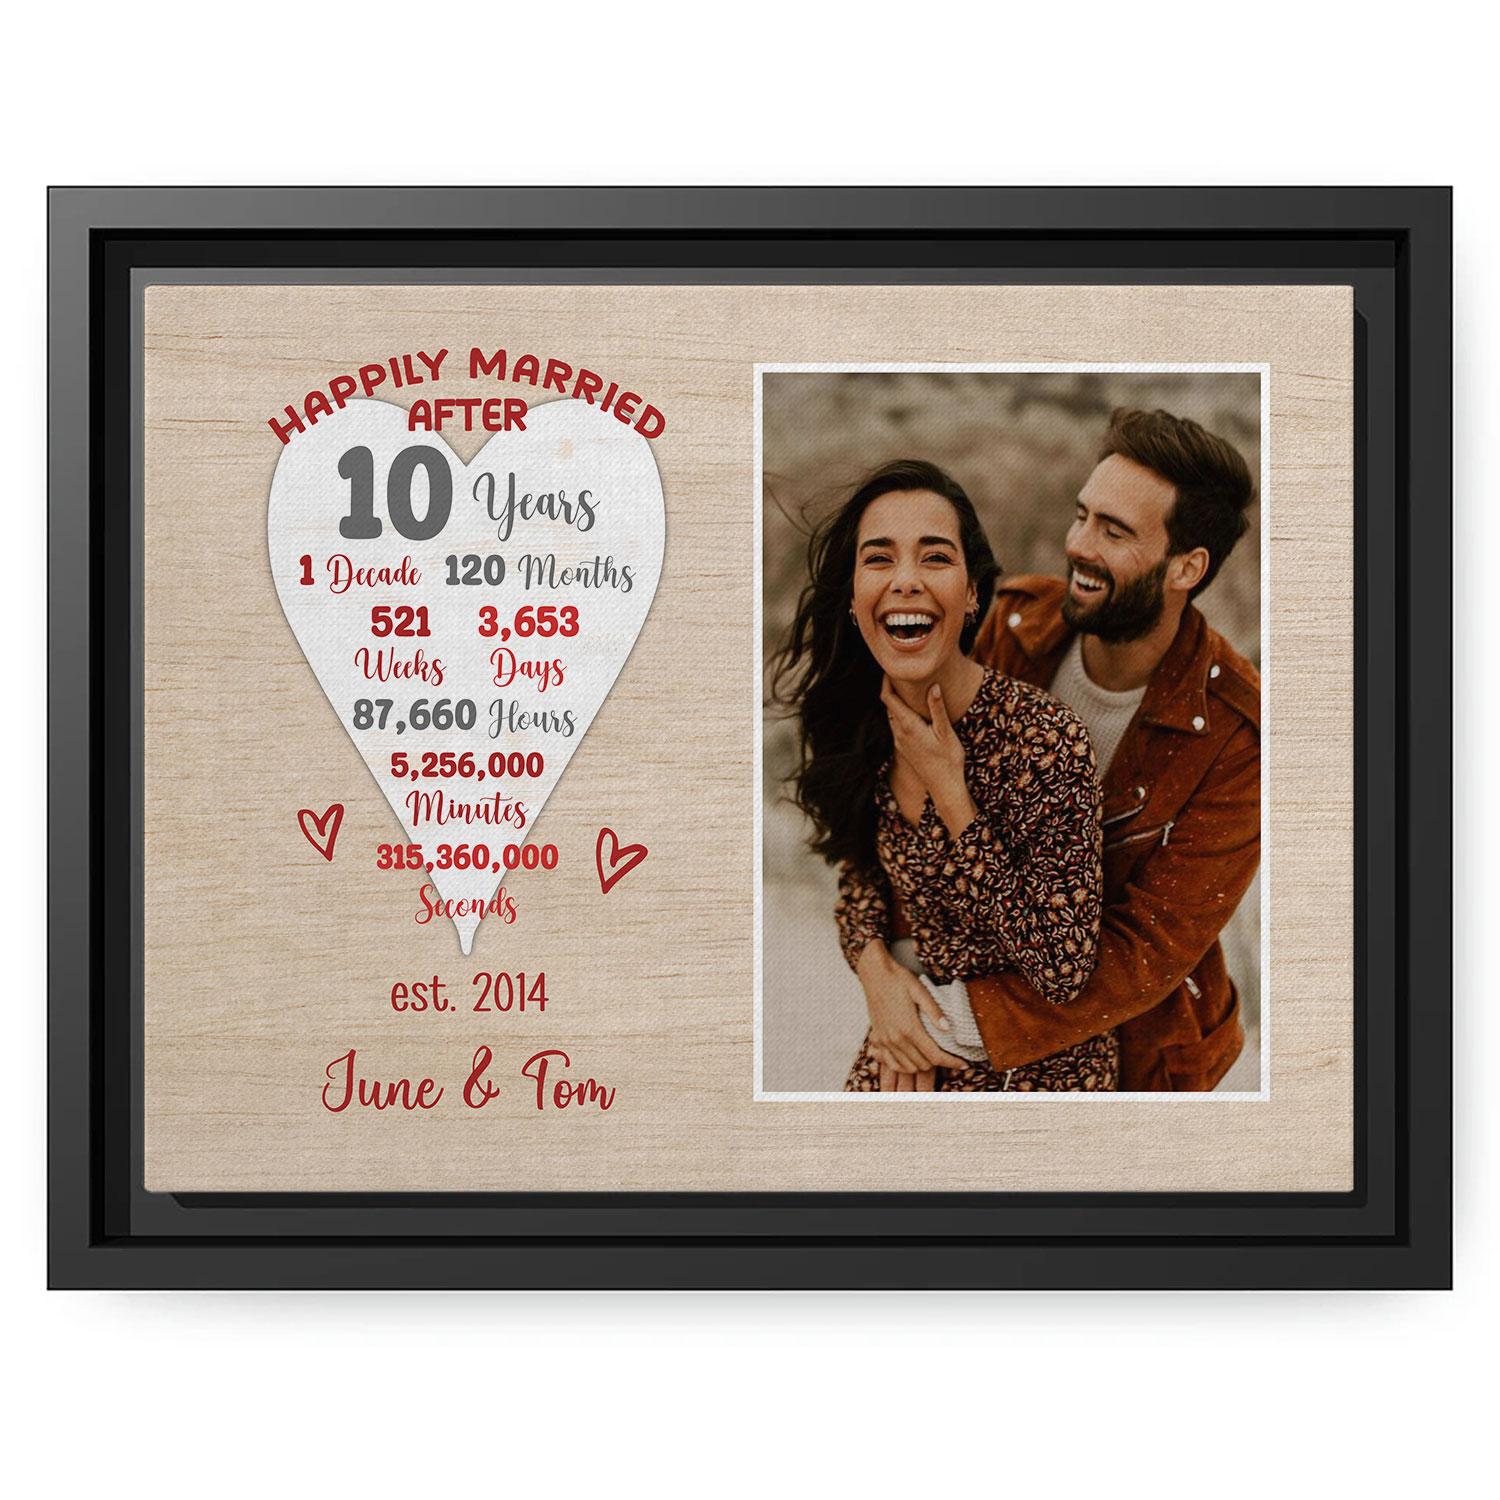 Happily Married After 10 Tears - Personalized 10 Year Anniversary gift For Husband or Wife - Custom Canvas Print - MyMindfulGifts